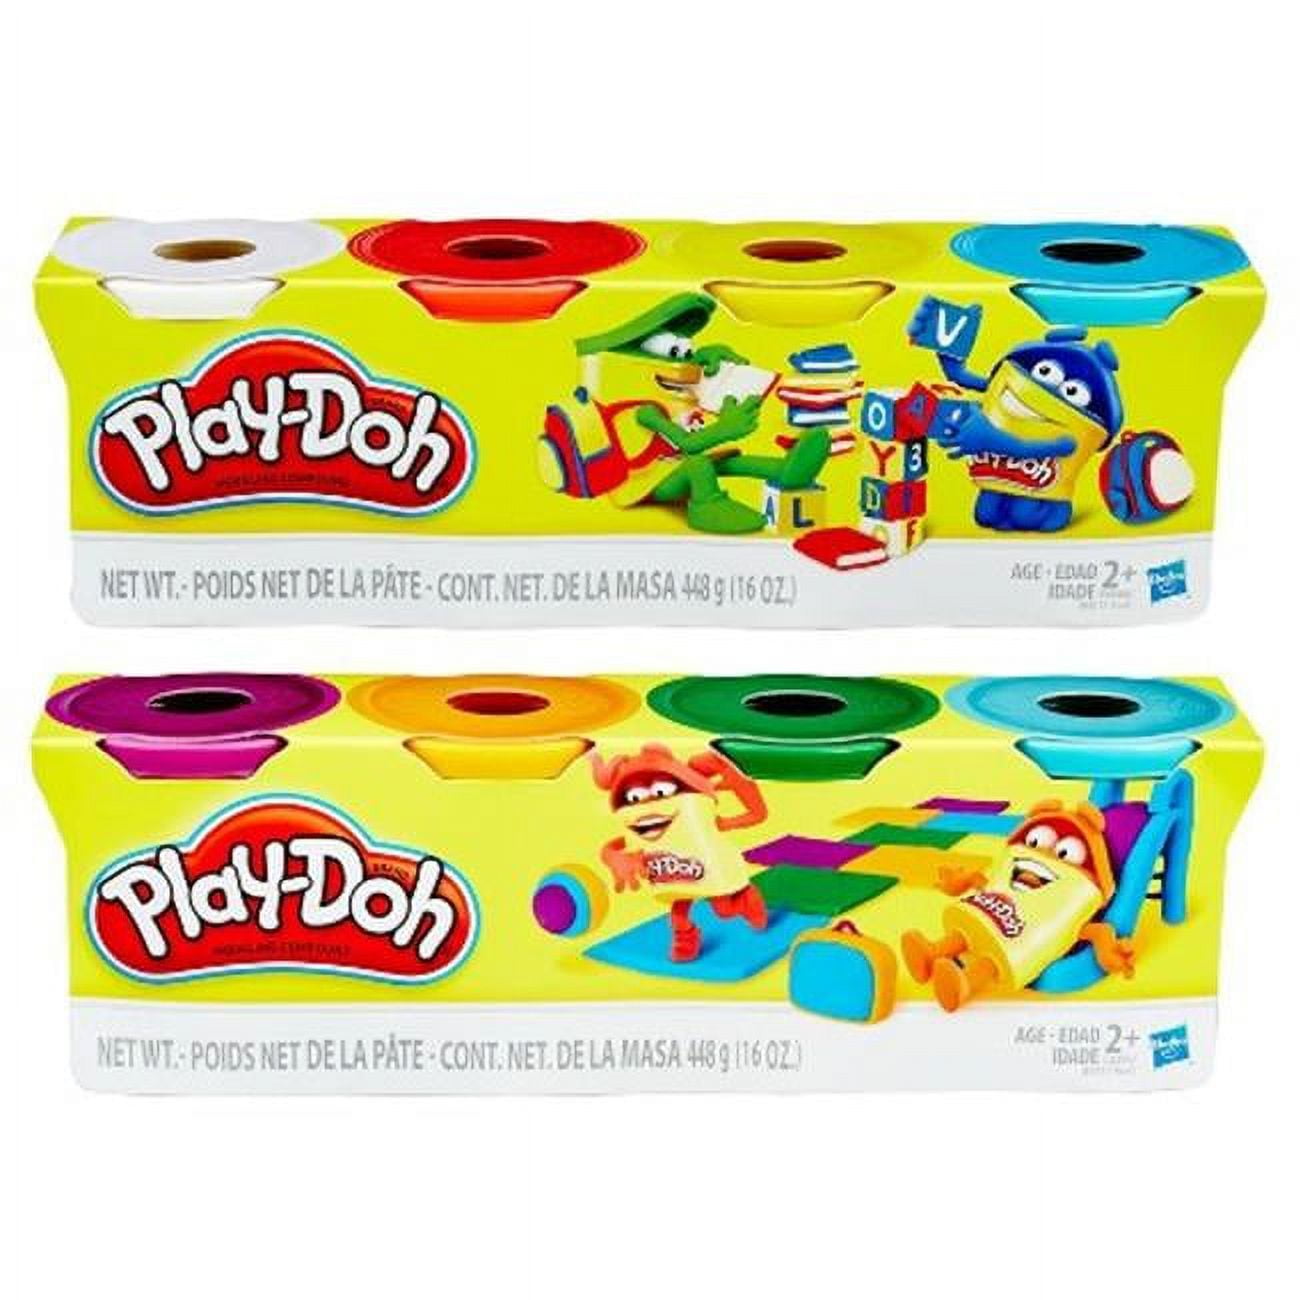 Play-Doh Confetti Compound - Bundle of 4-Colors - Yellow, Pink, Light Blue  and White - One 4oz Can of Each Color